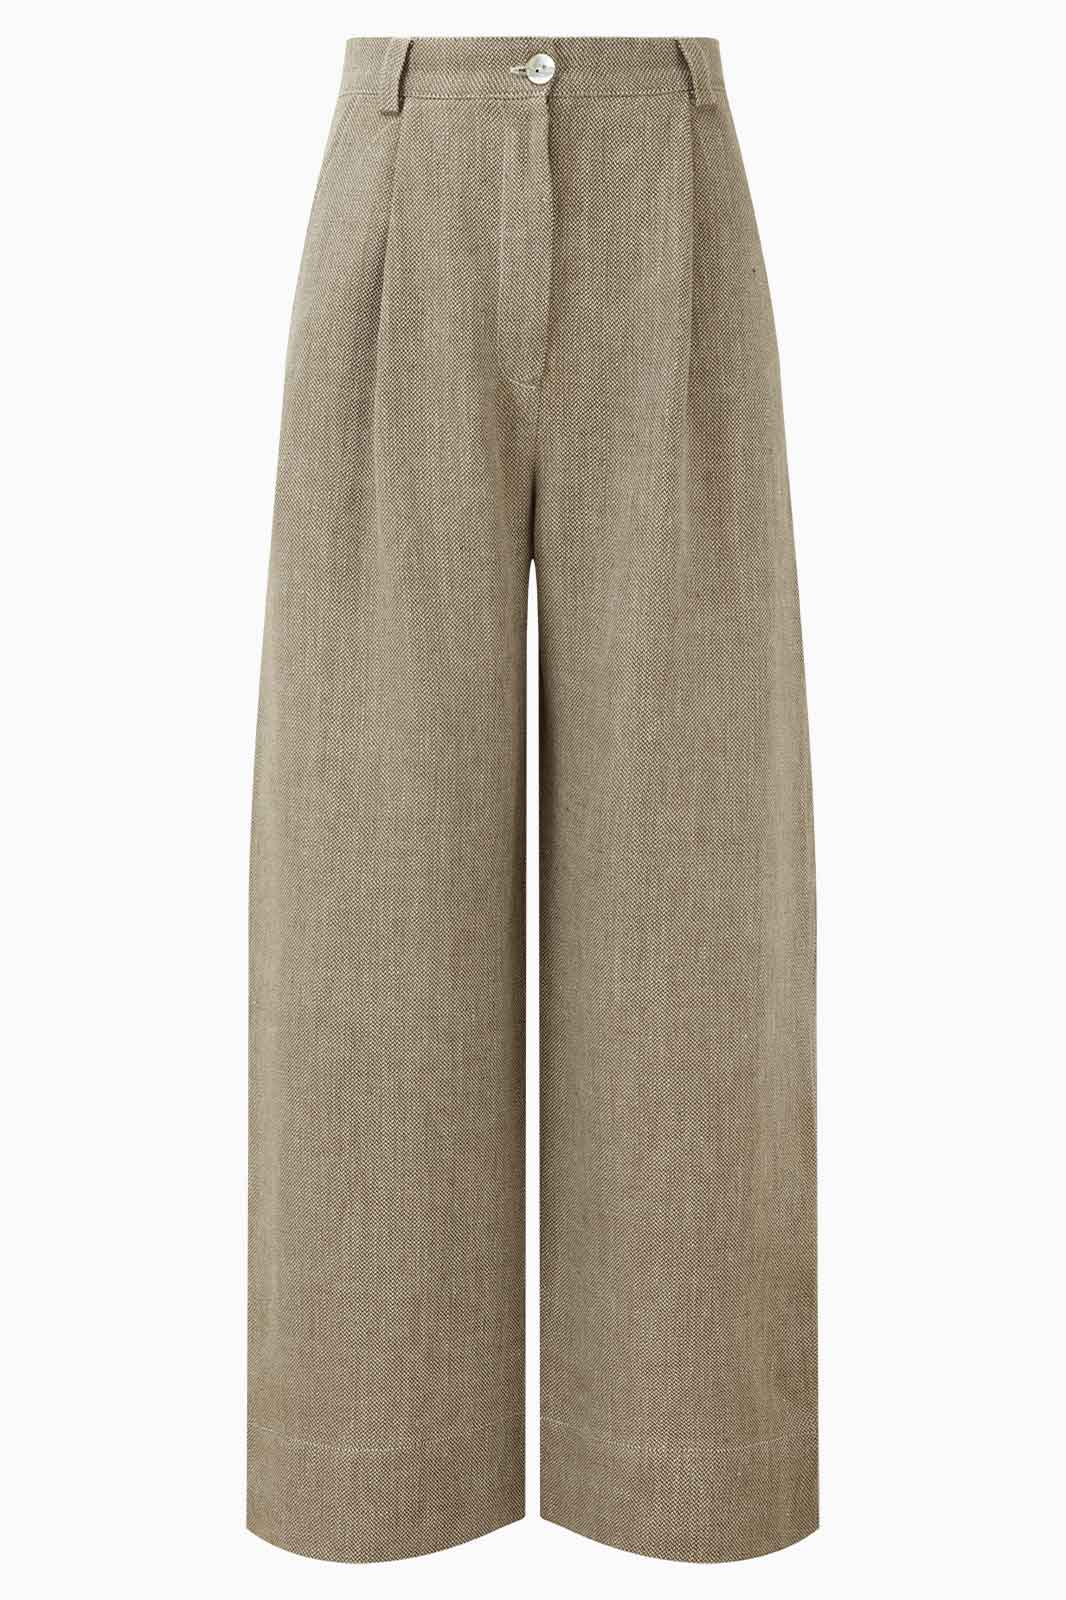 arkitaip Trousers The Wabi Pleated Linen Trousers in khaki - Archive